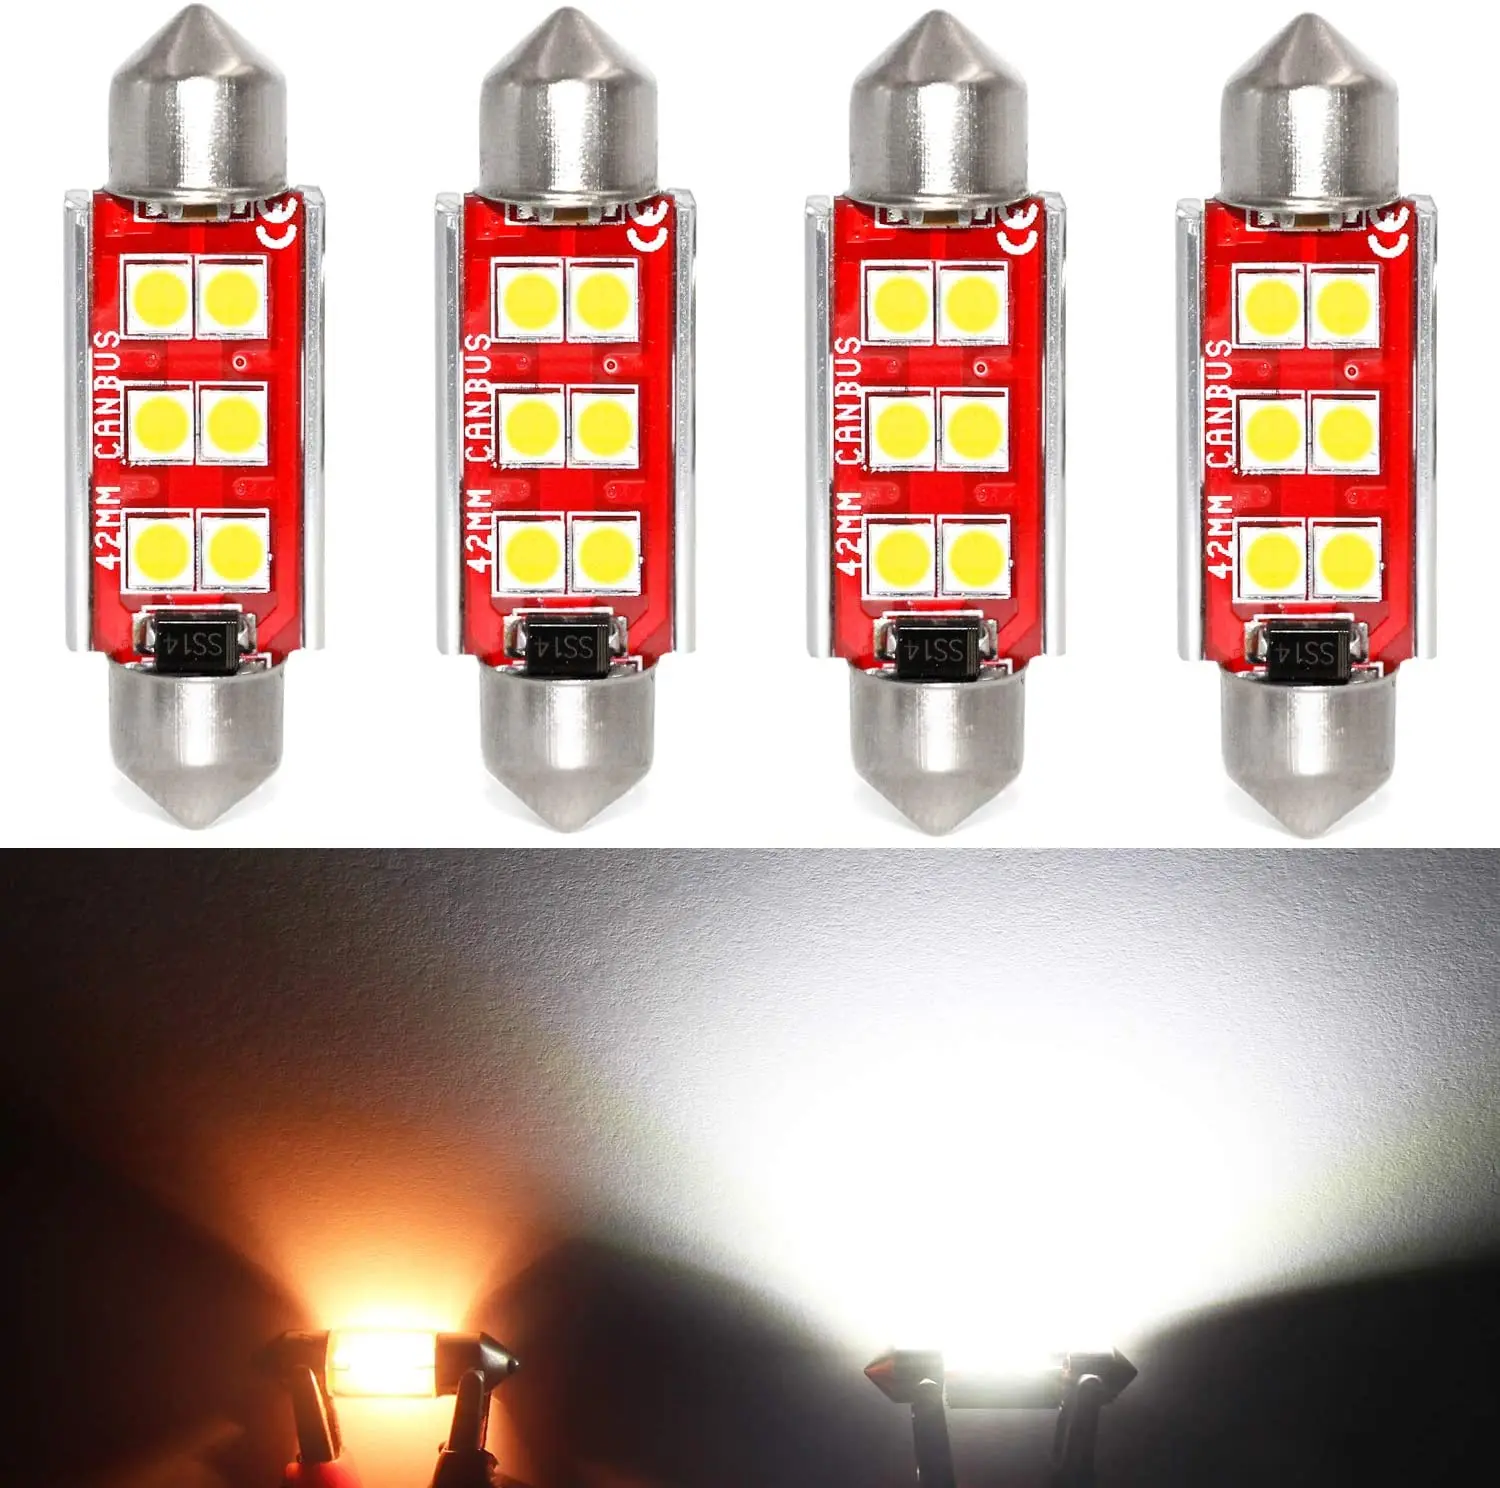 Super Bright 211-2 LED Bulb 3030 6-SMD Festoon 41mm 42mm 578 212-2 Bulbs for Car Interior Map Dome Trunk Courtesy Light,(4Pack)